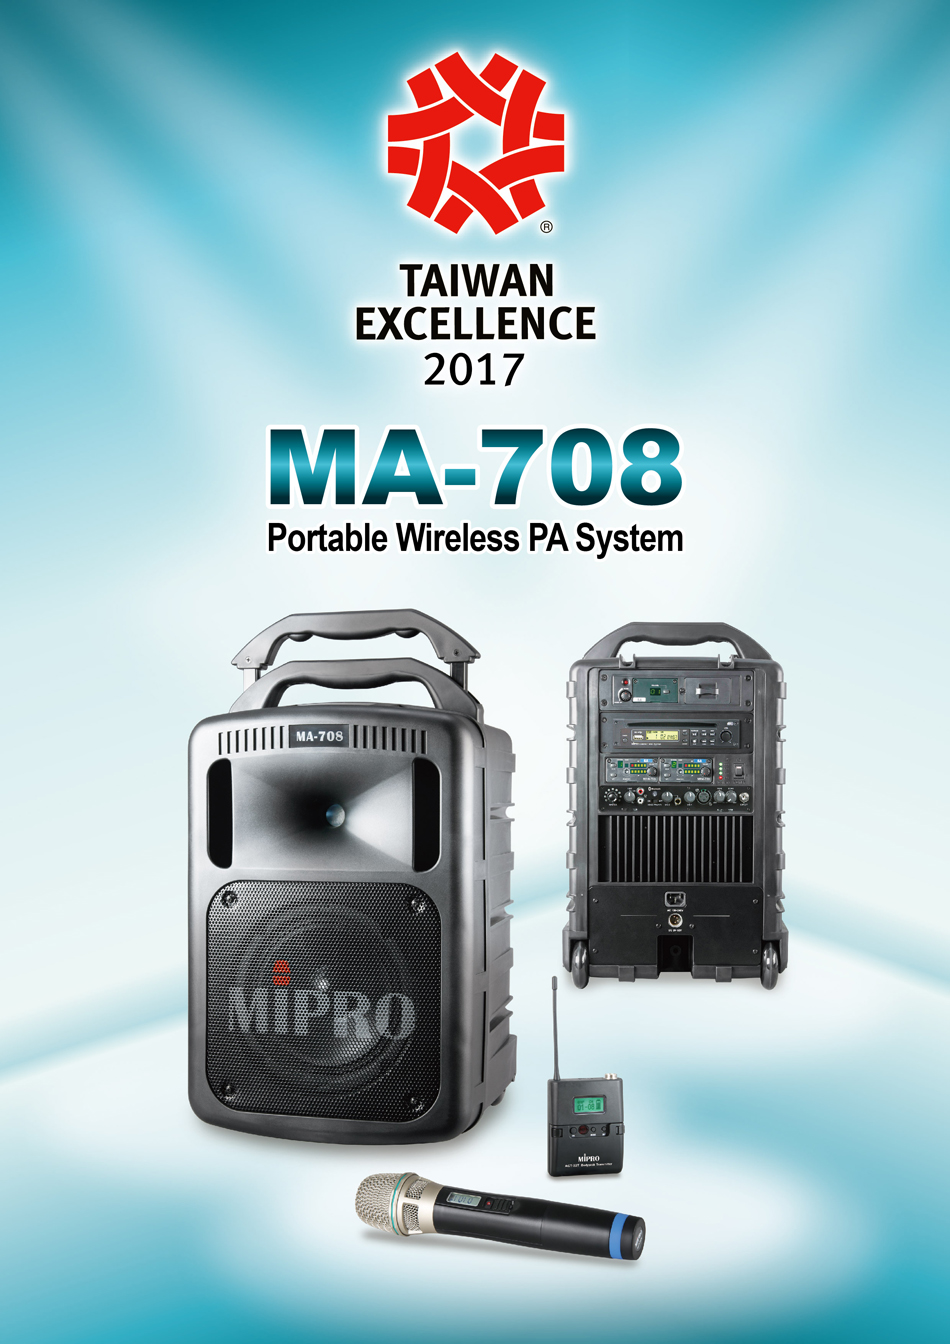 MIPRO MA-708 Portable Wireless PA System Wins Taiwan Excellence Award